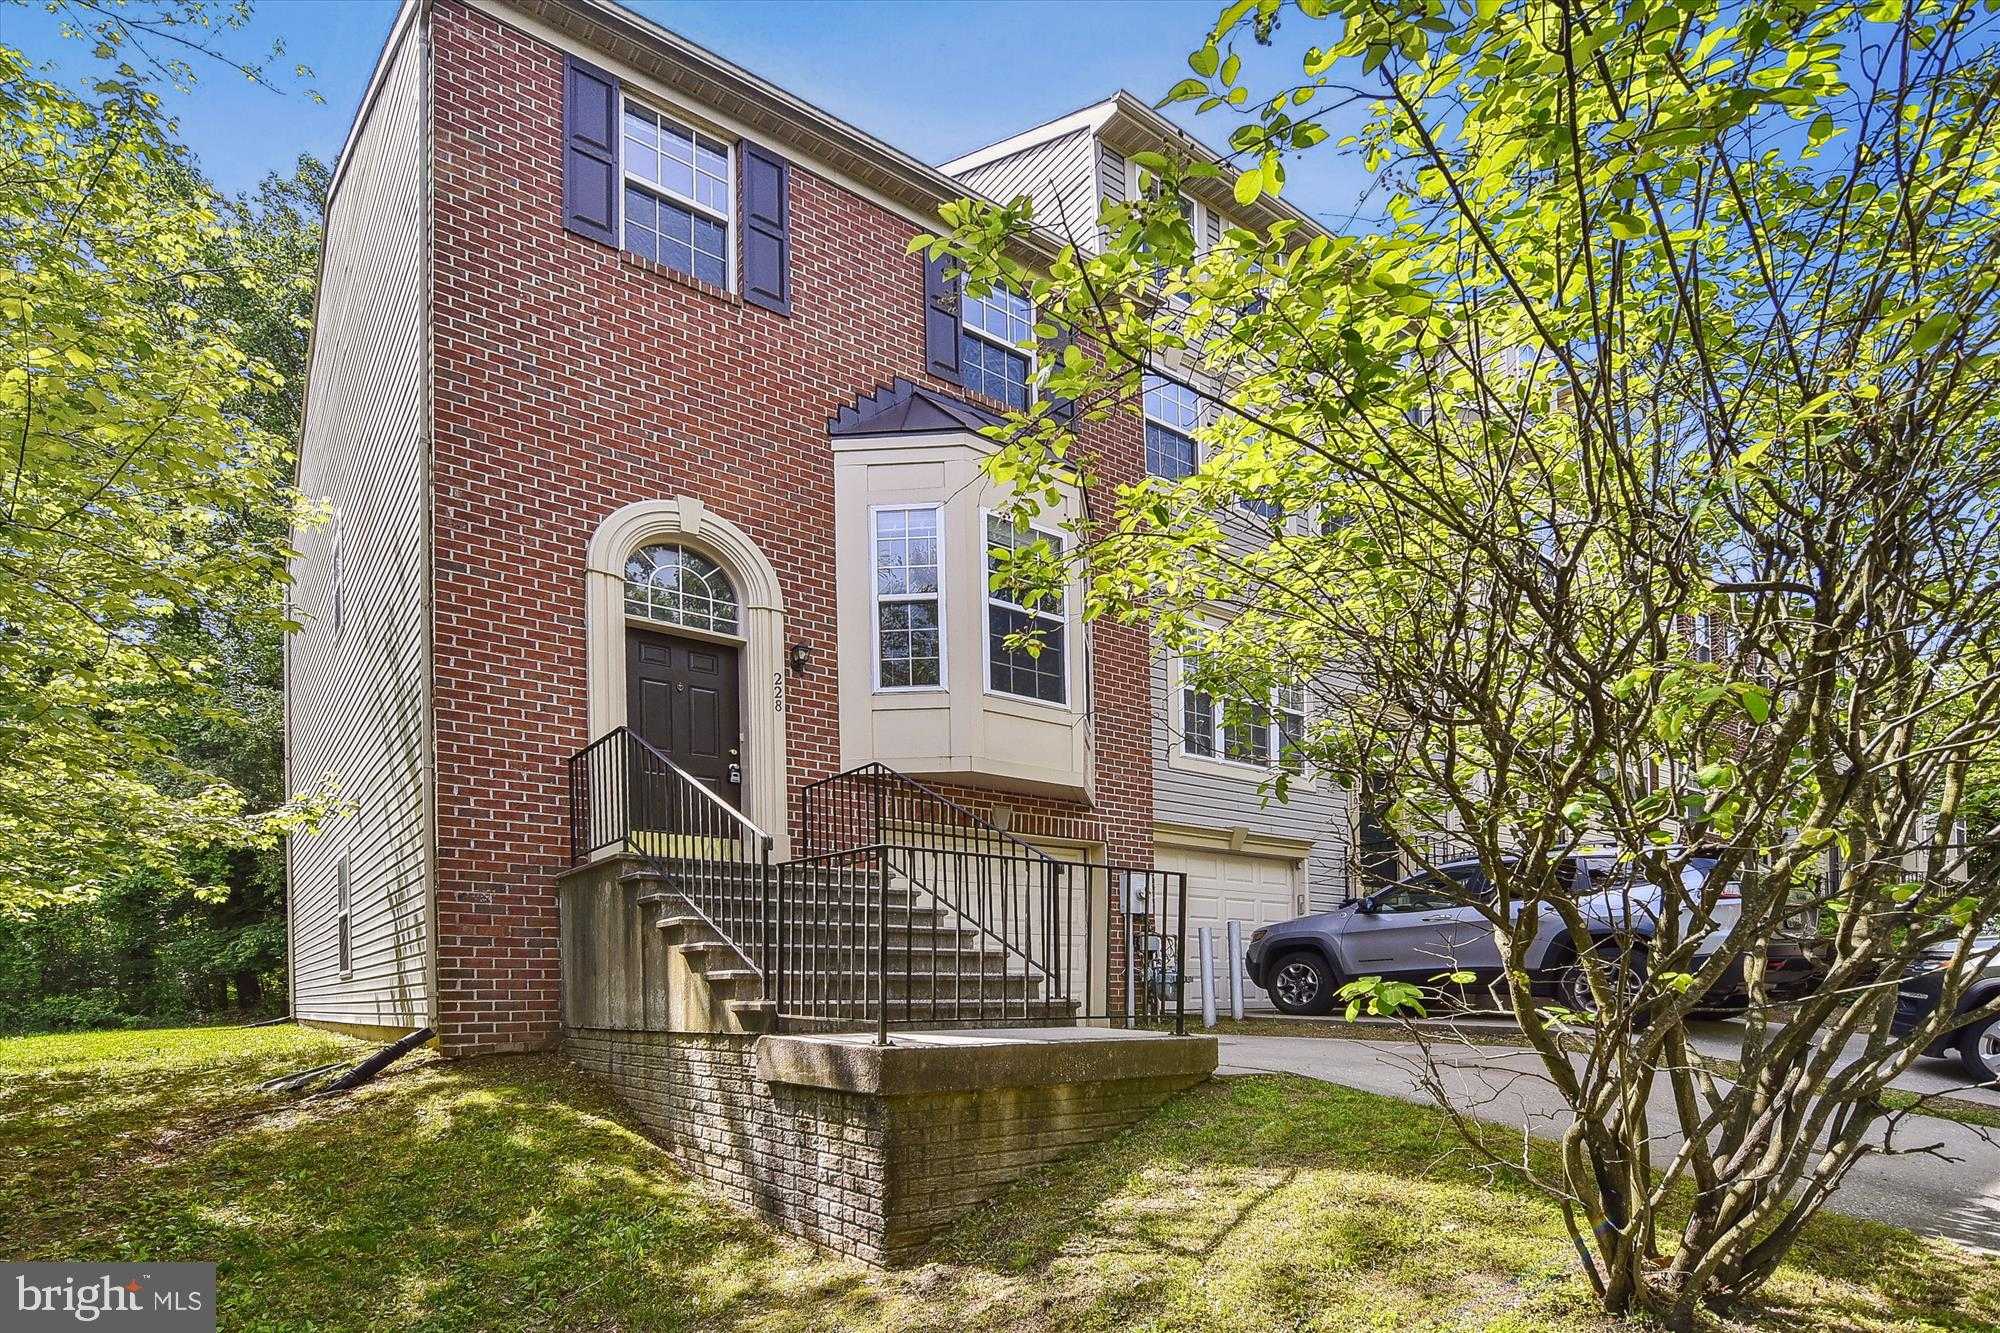 View REISTERSTOWN, MD 21136 townhome